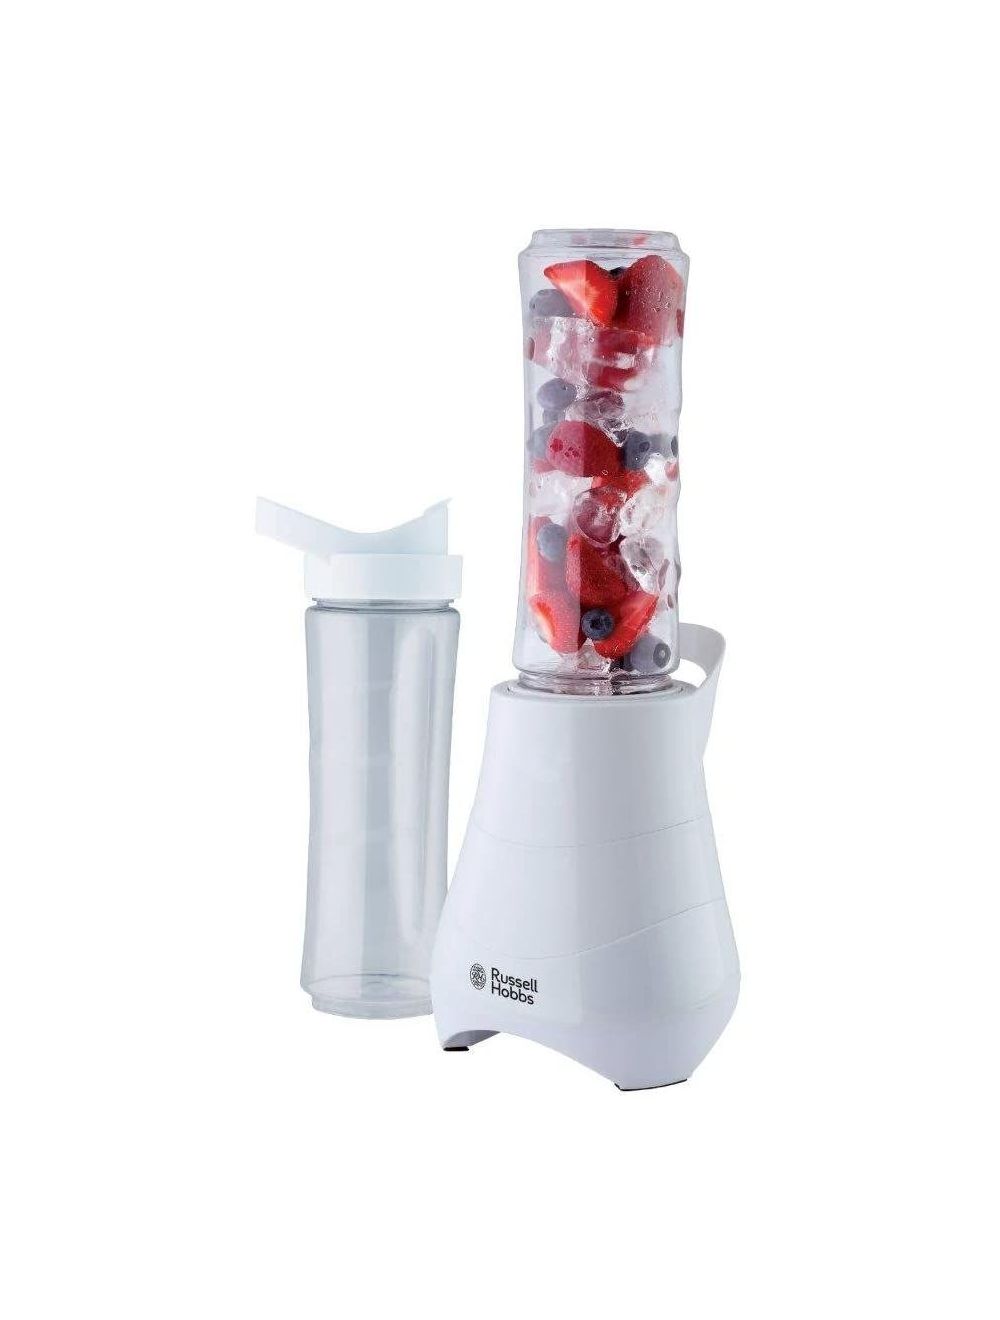 Russell Hobbs Mix and Go Personal Blender/Smoothie Maker 600ml -21350